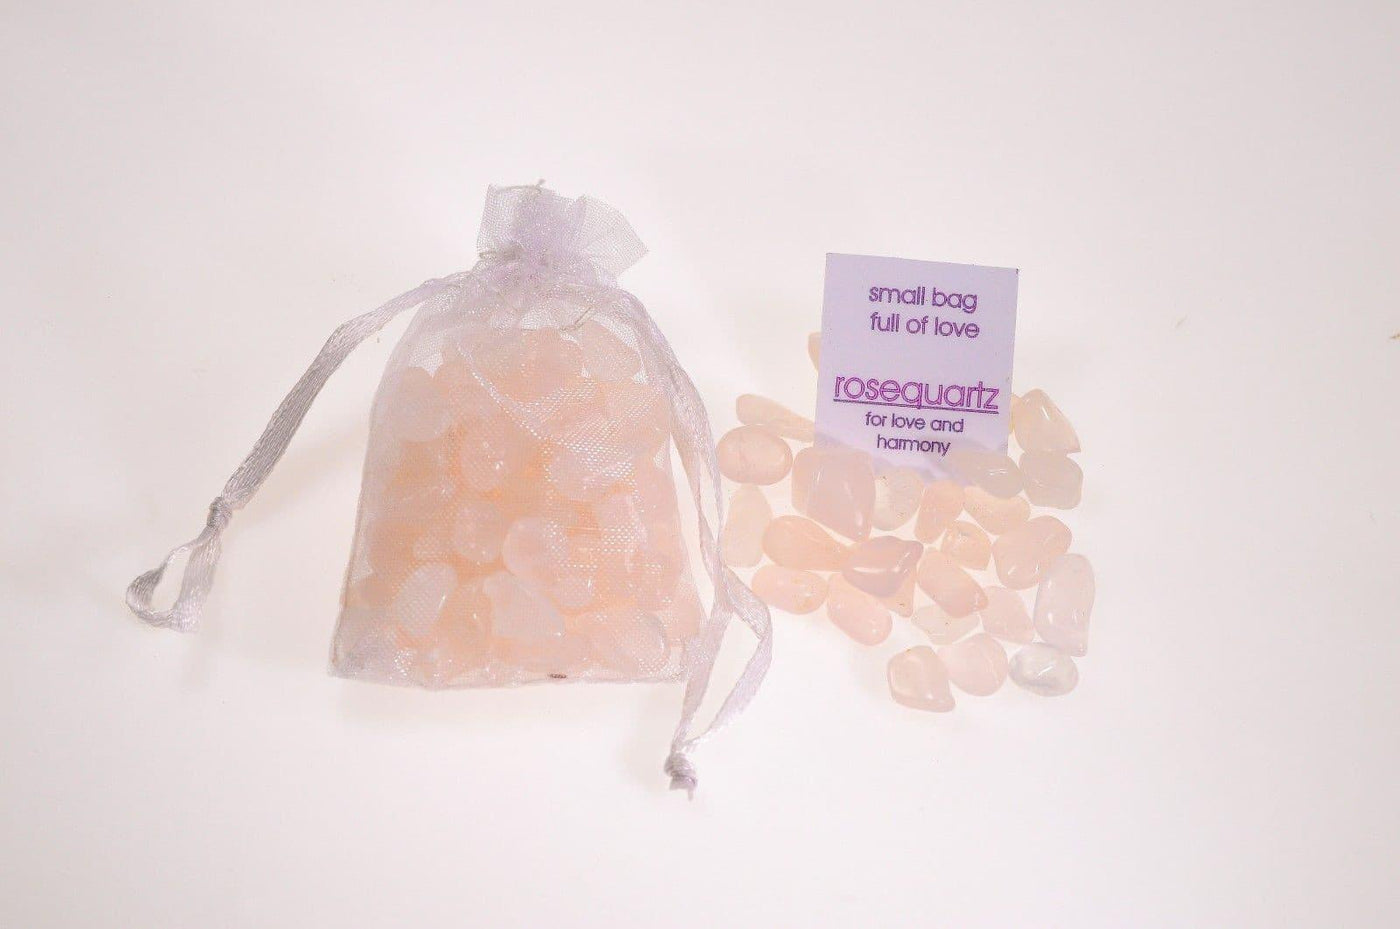 Energetic Stone bag full with love of the Rose Quartz stone for love and harmony.